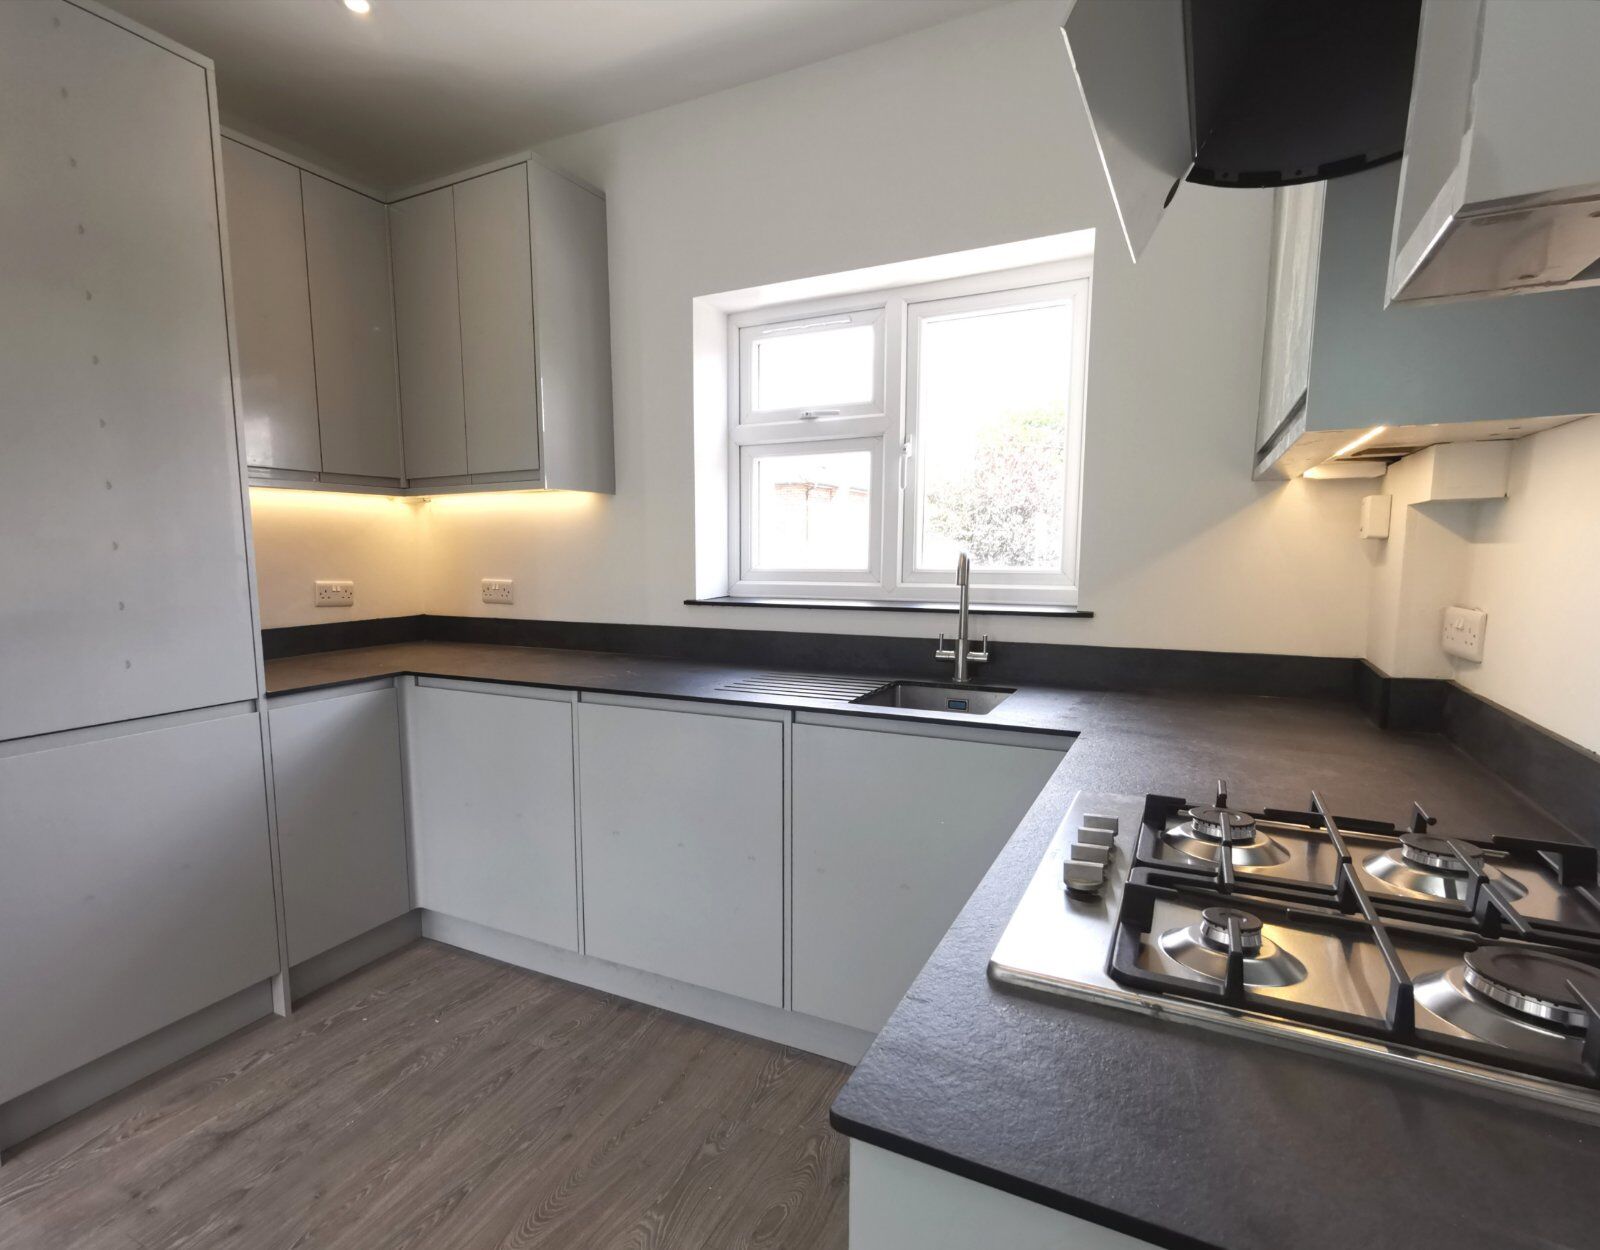 2 bedroom  flat for sale Chadwick Street, High Wycombe, HP13, main image